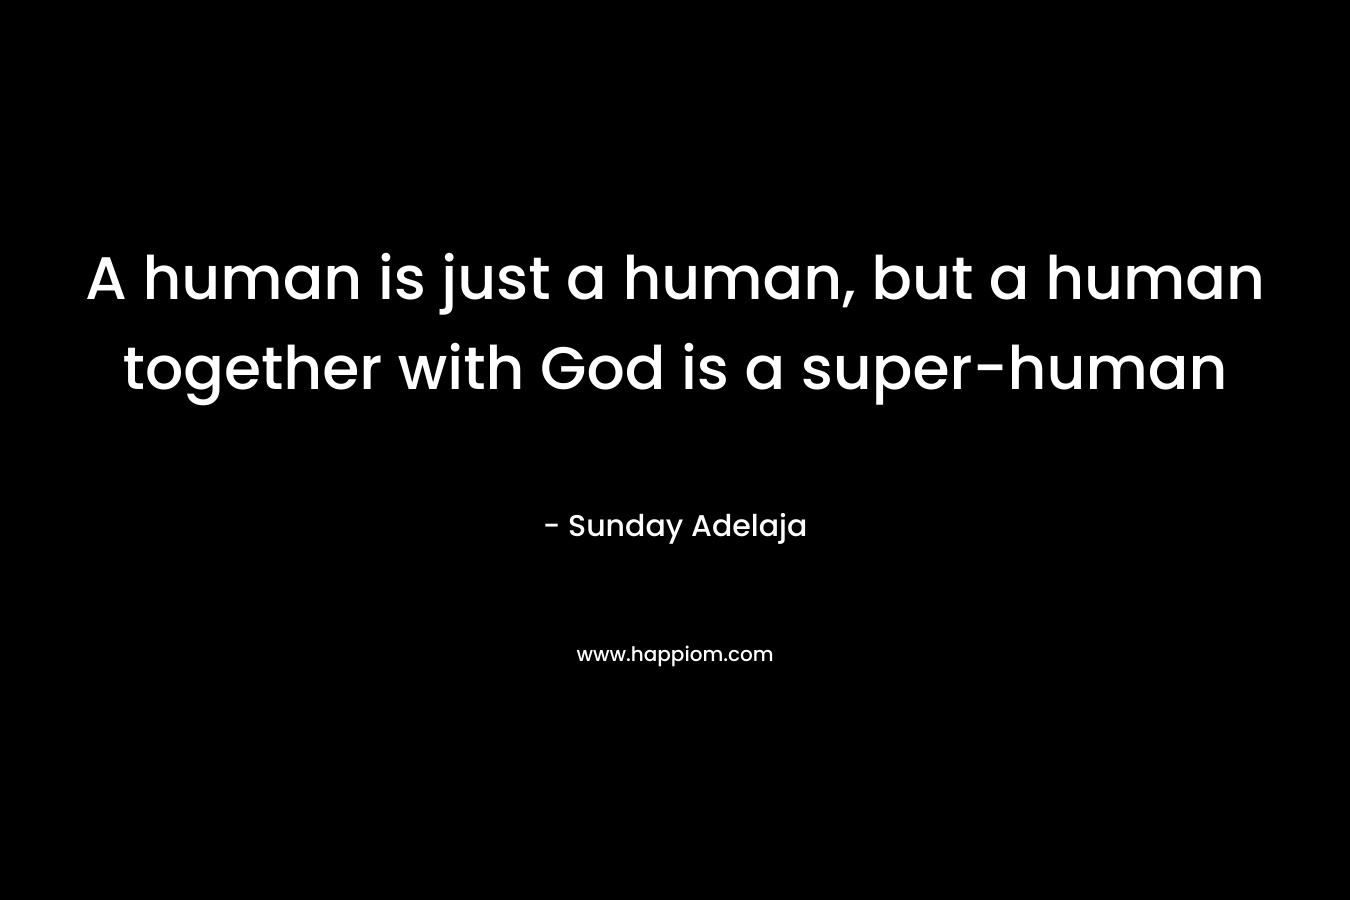 A human is just a human, but a human together with God is a super-human